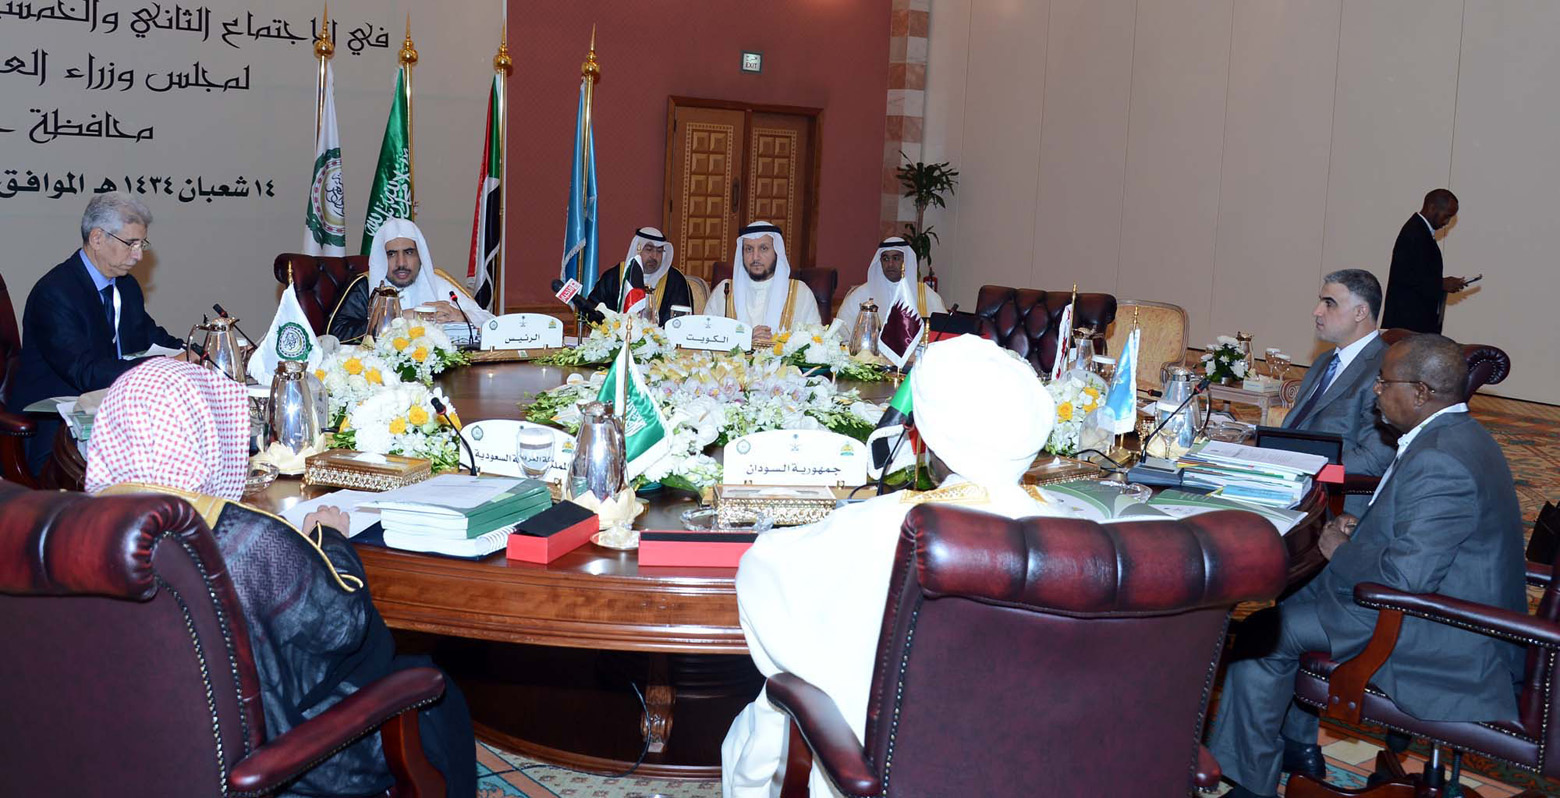 Minister of Justice and Minister of Awqaf and Islamic Affairs Shareeda Abdullah Al-Mousherji during the meeting